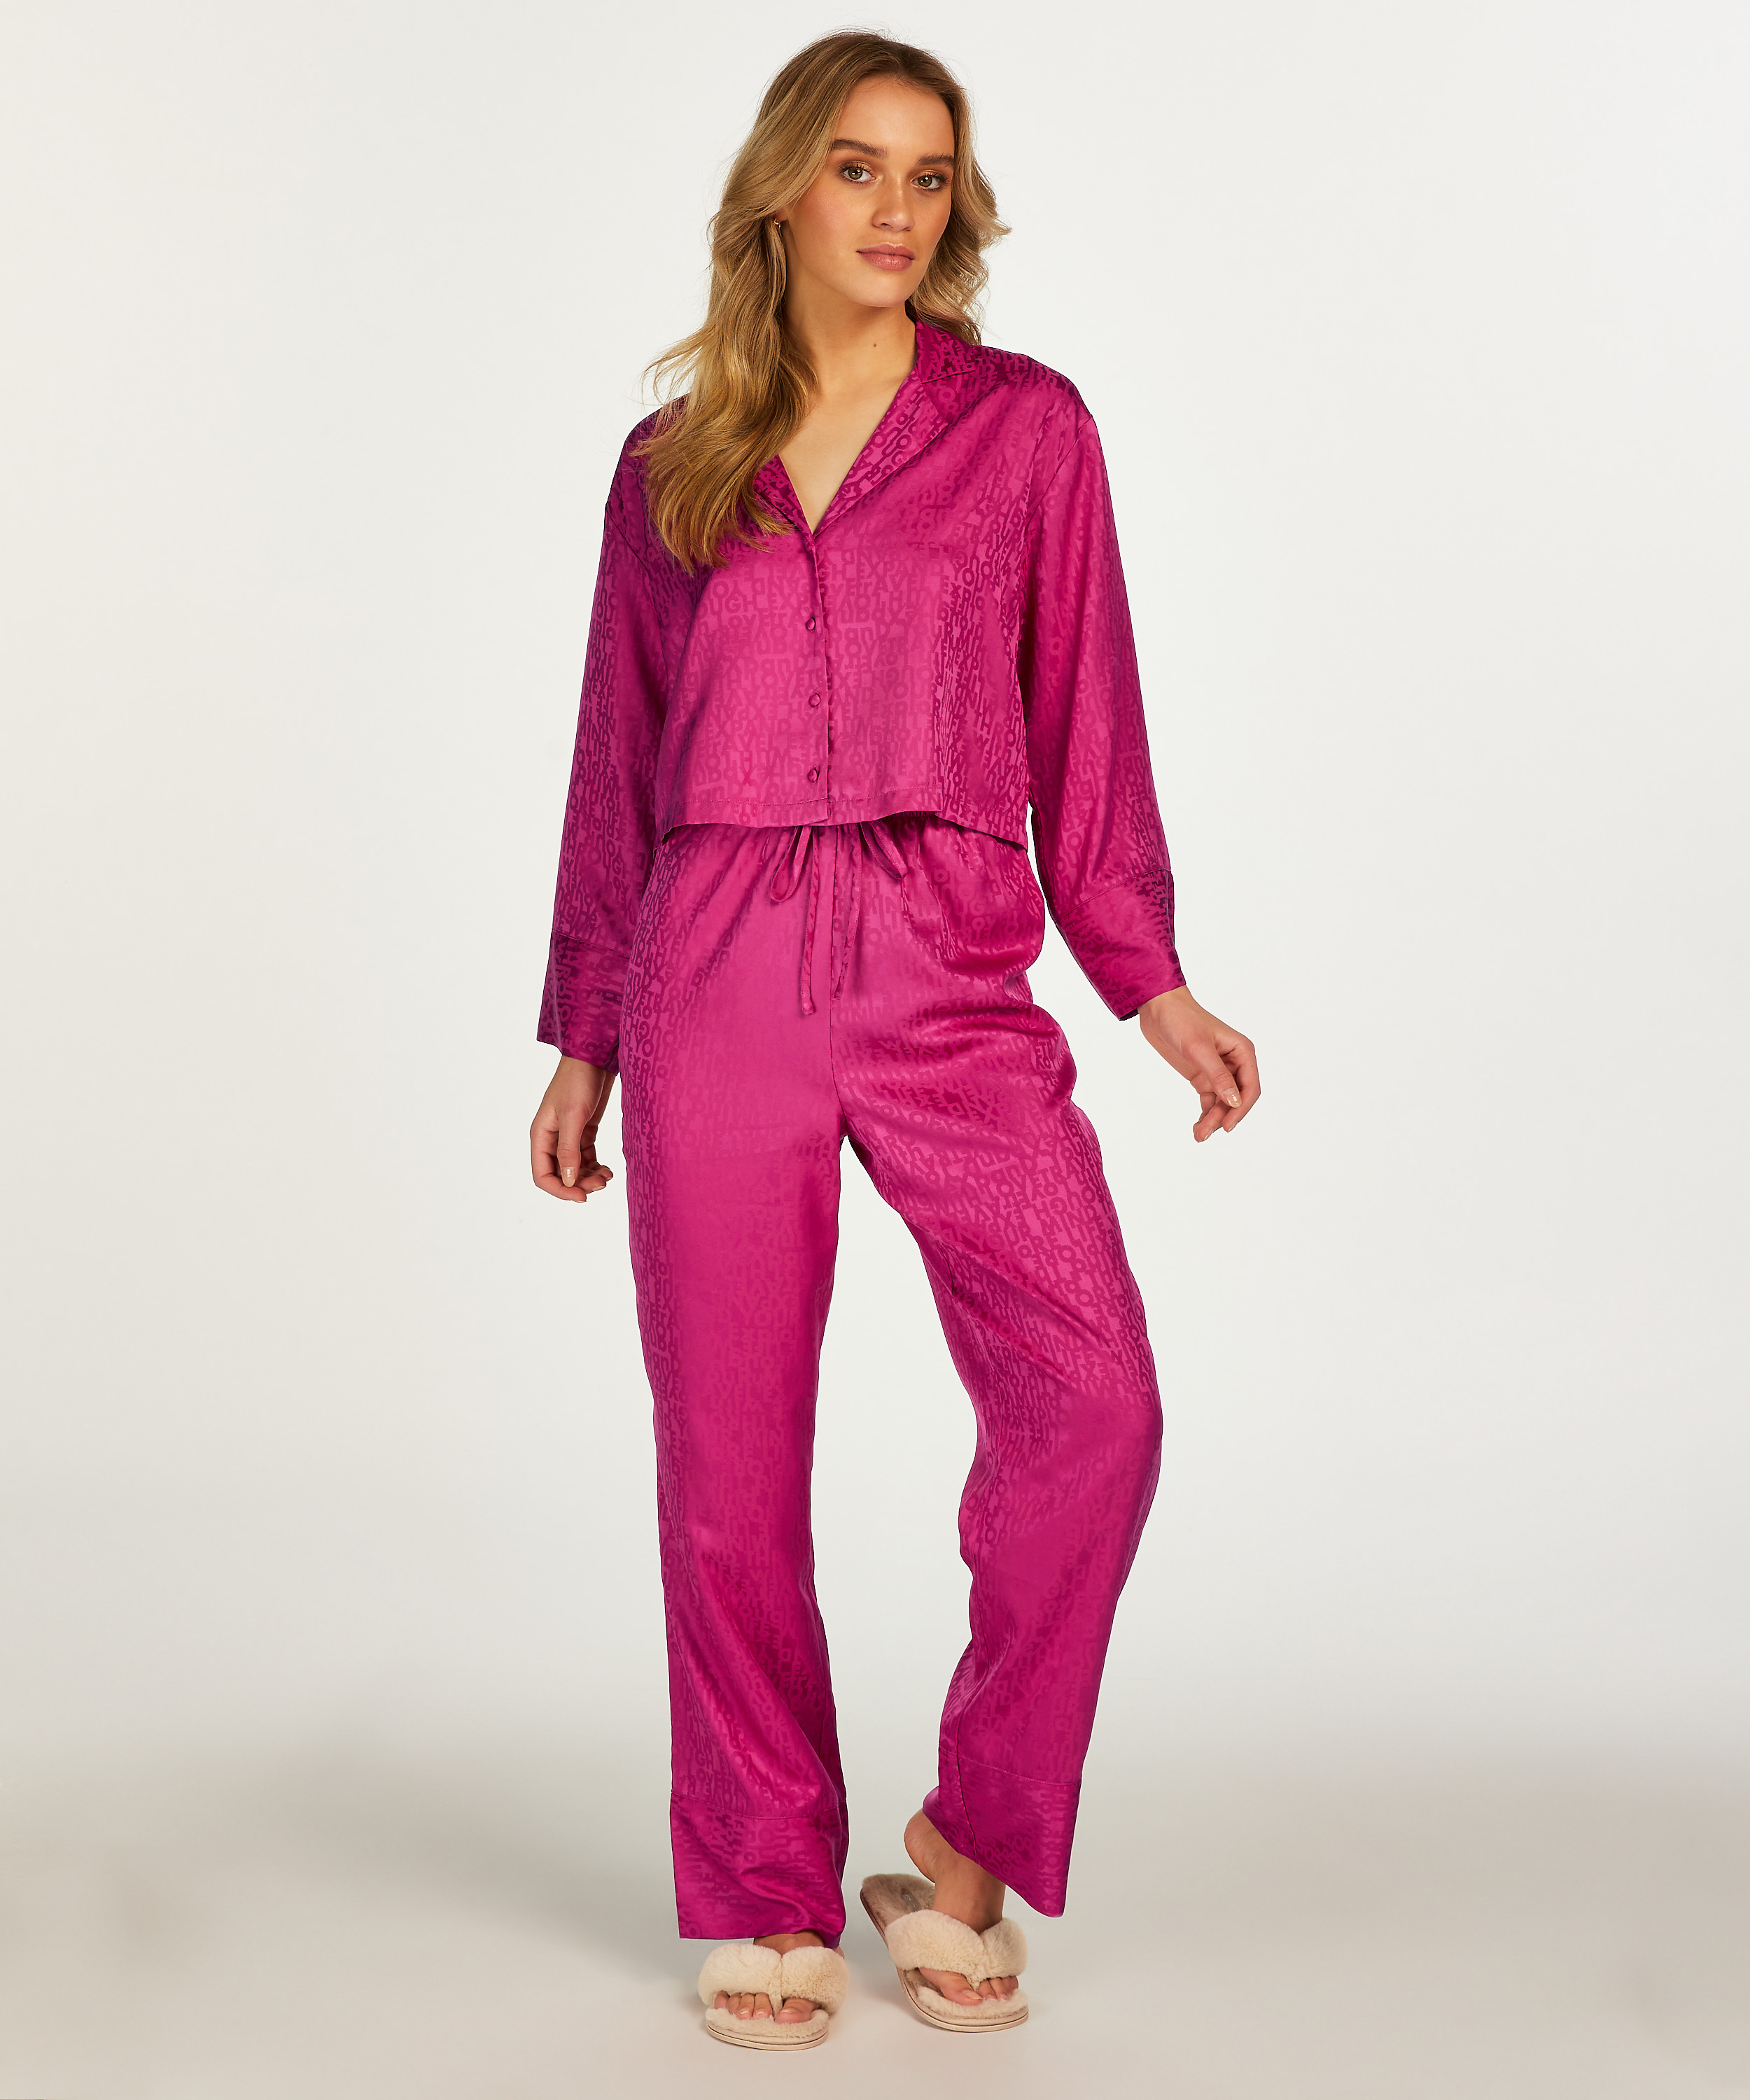 Satin Trousers, Pink, main